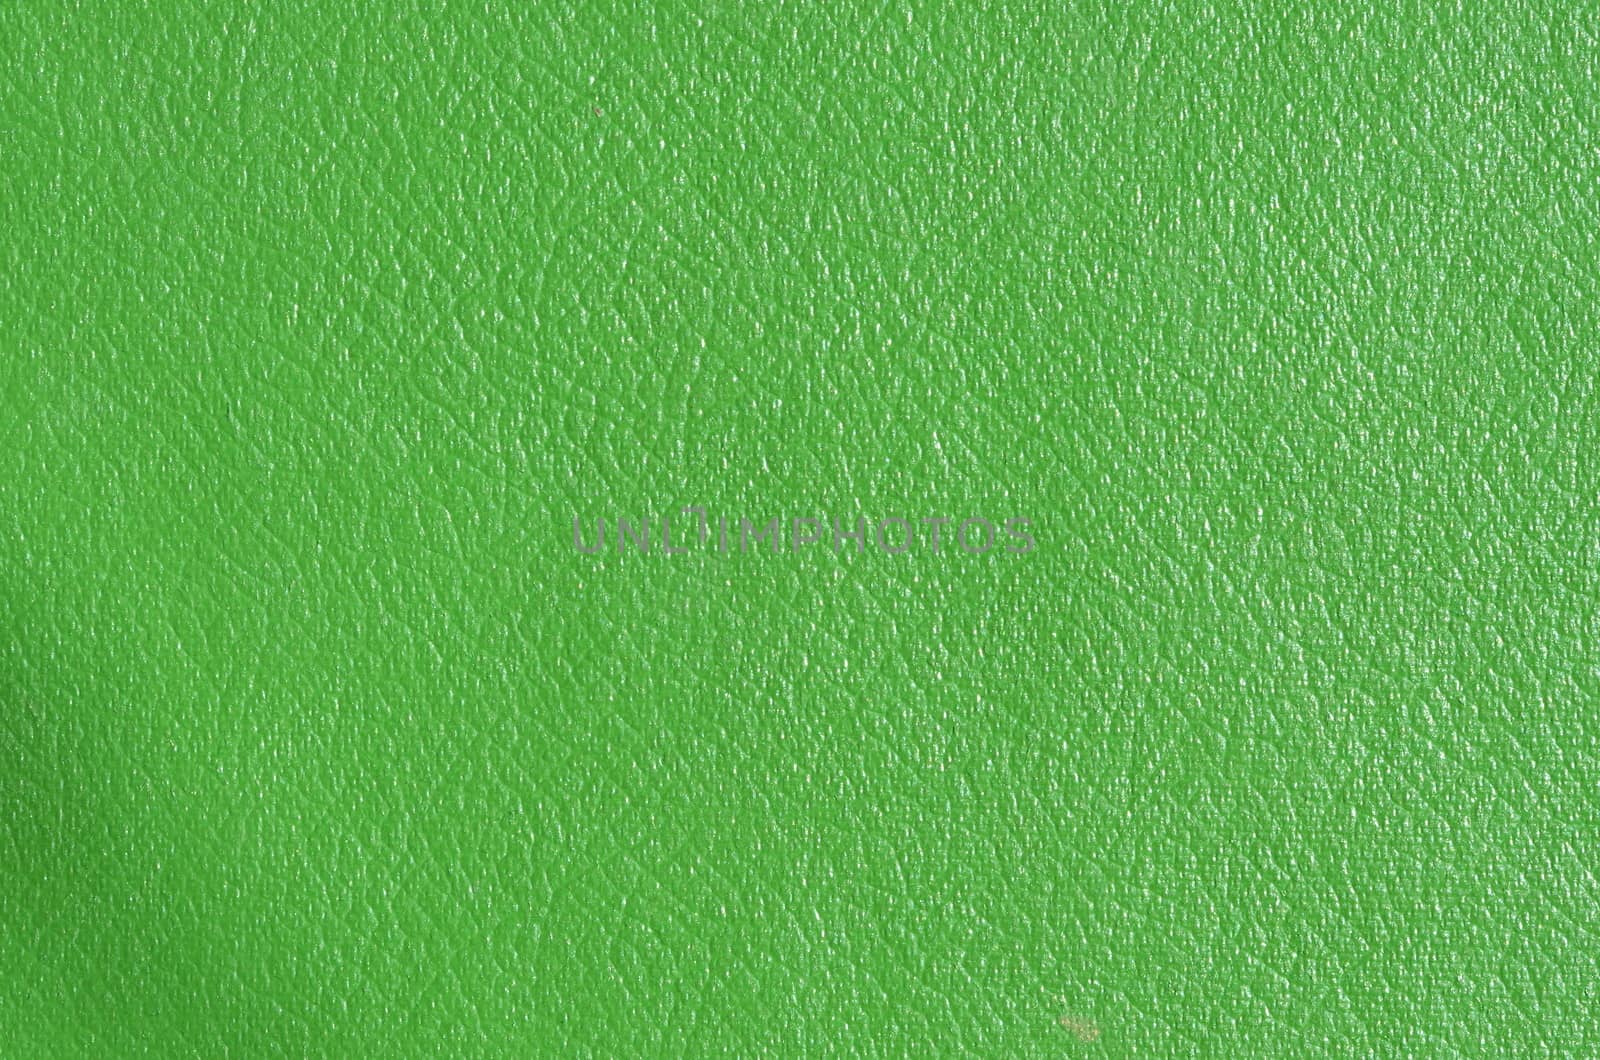 green leather by sarkao